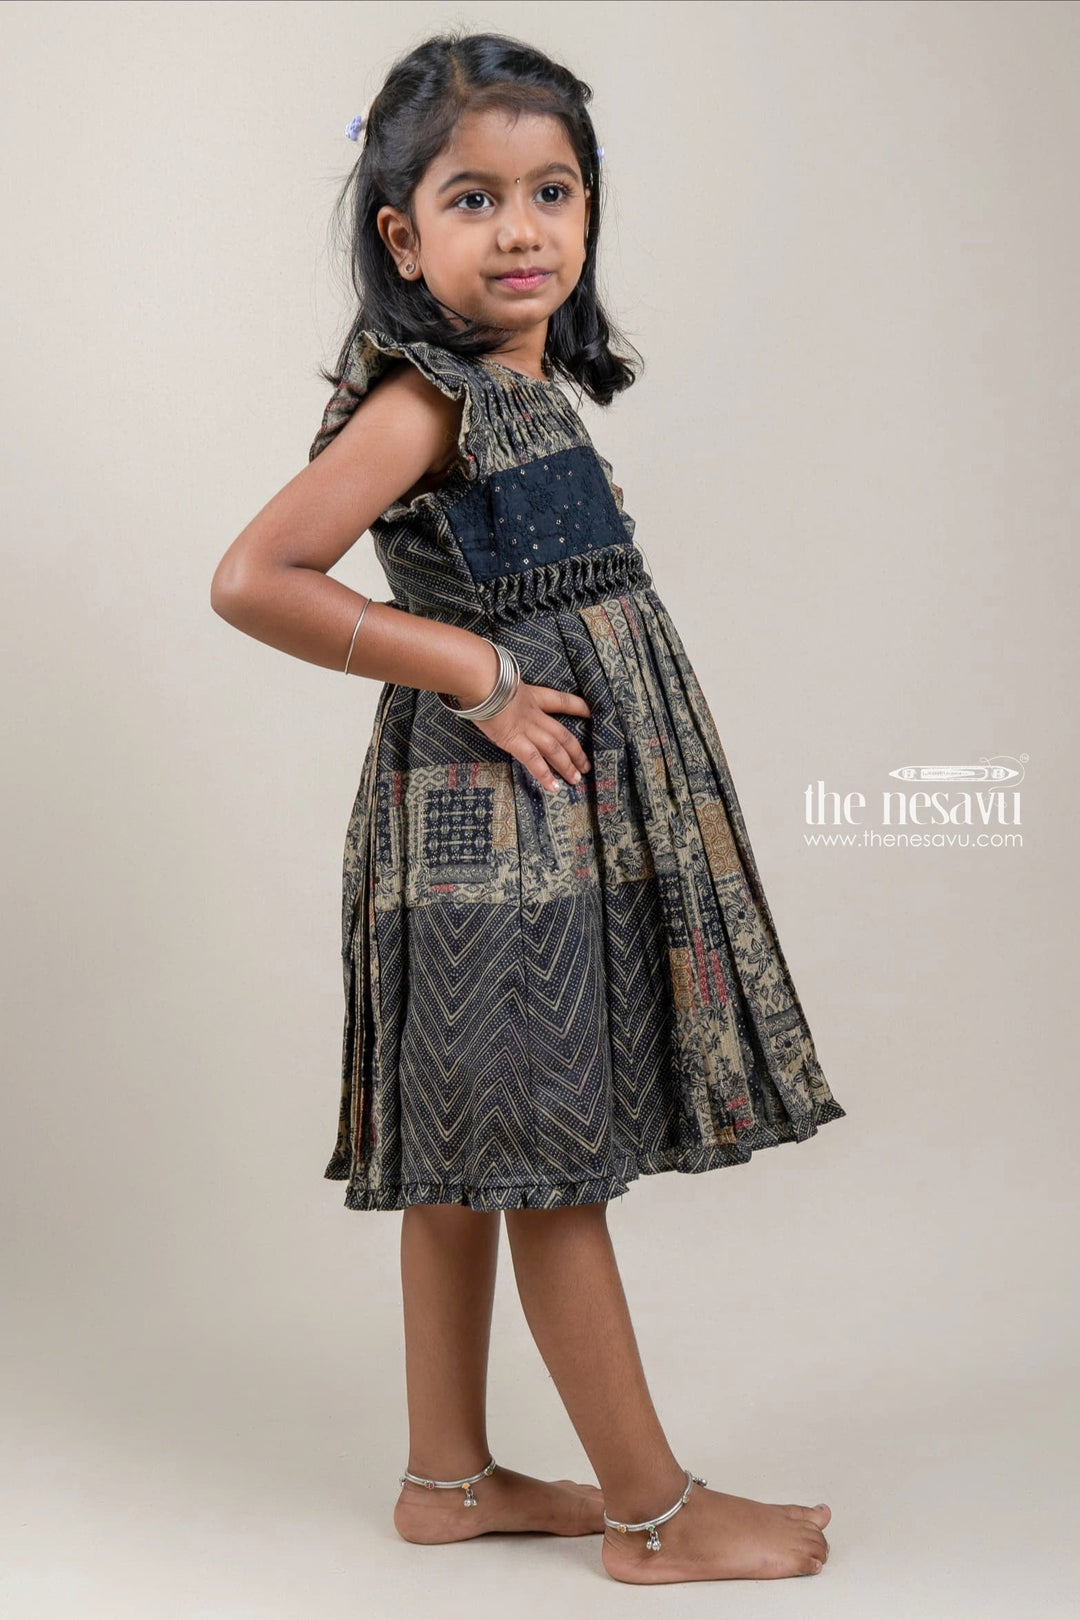 The Nesavu Girls Cotton Frock Attractive Navy-Blue Floral And Zig-Zag Printed Casual Cotton Frock For Girls Nesavu Cute Cotton Dress For Girls | Floral Printed Cotton Frock | The Nesavu